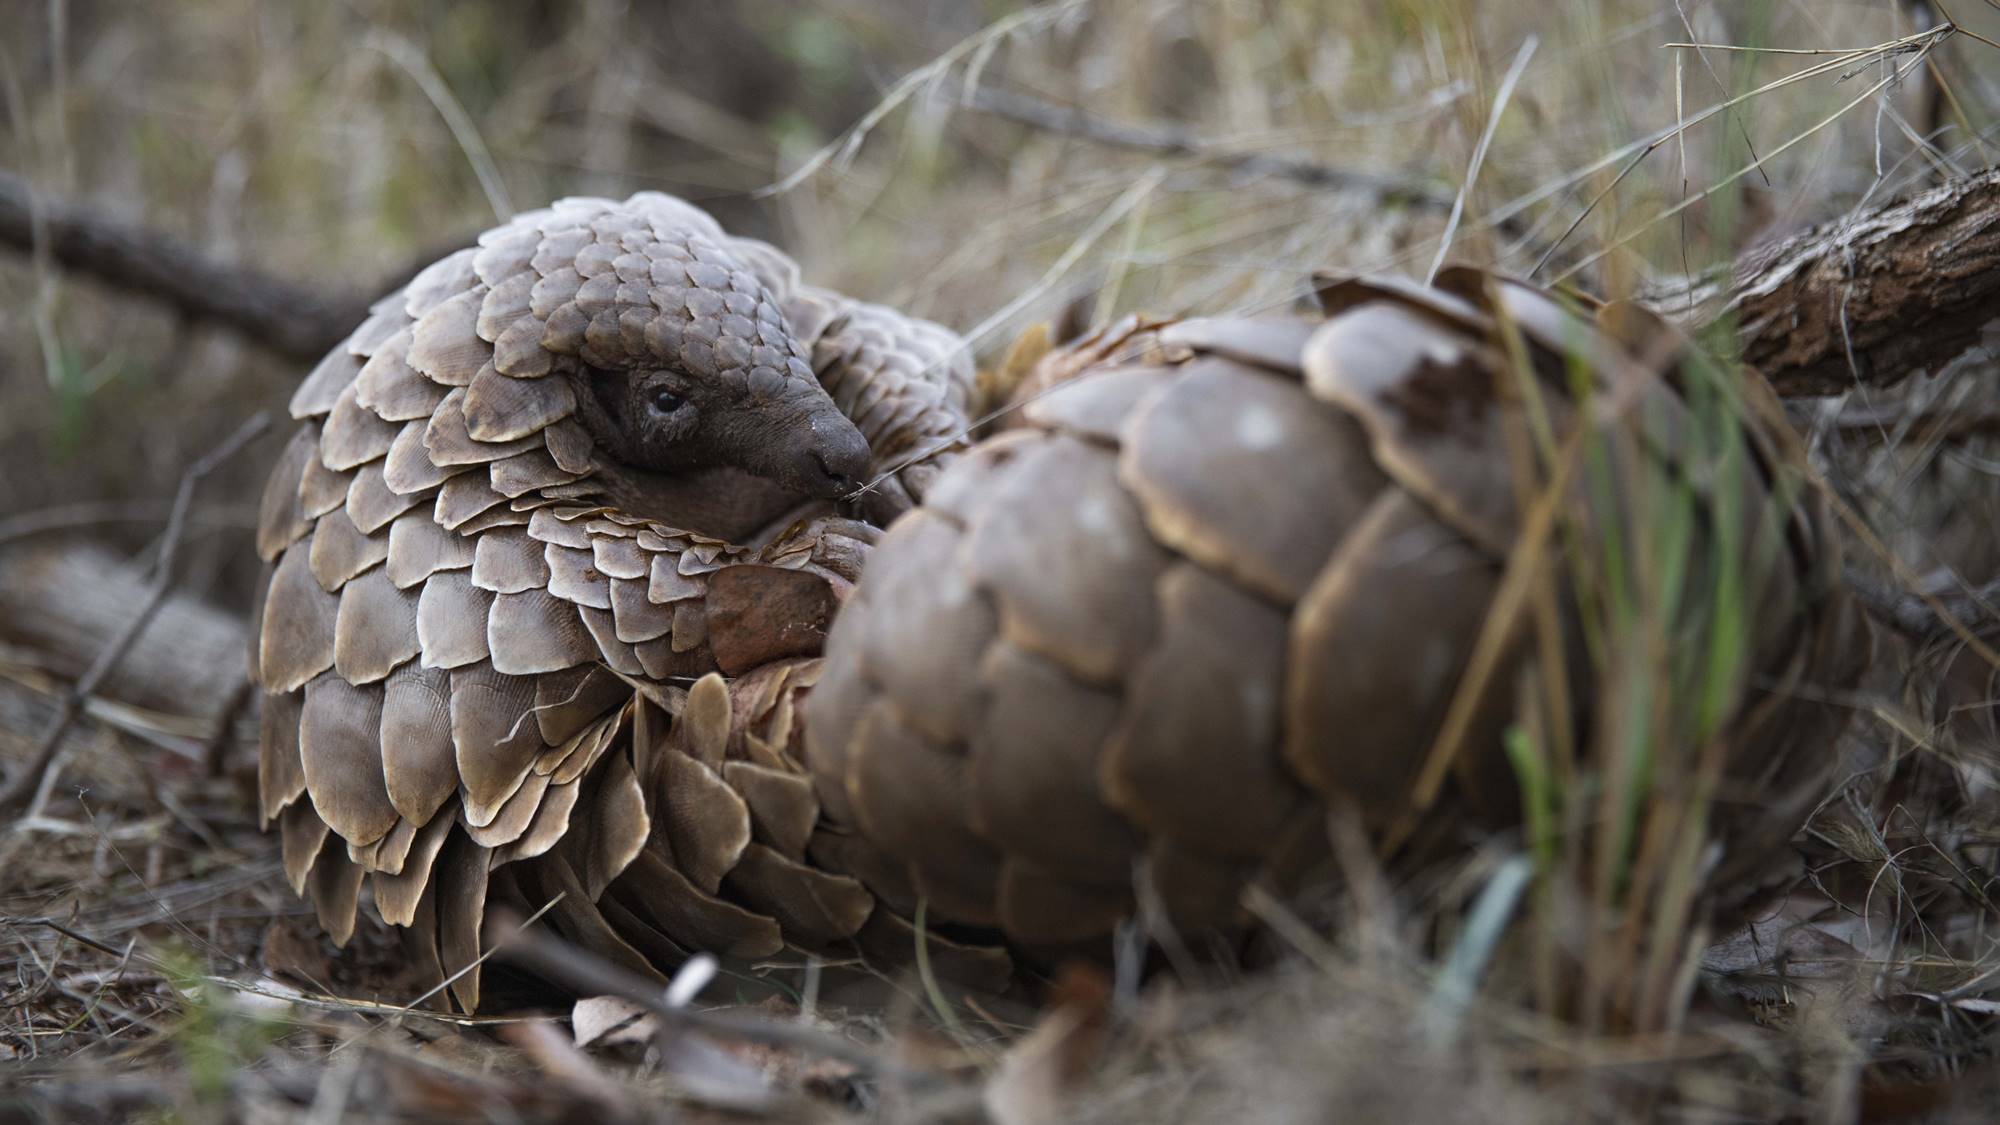 Protecting Pangolins, South Africa